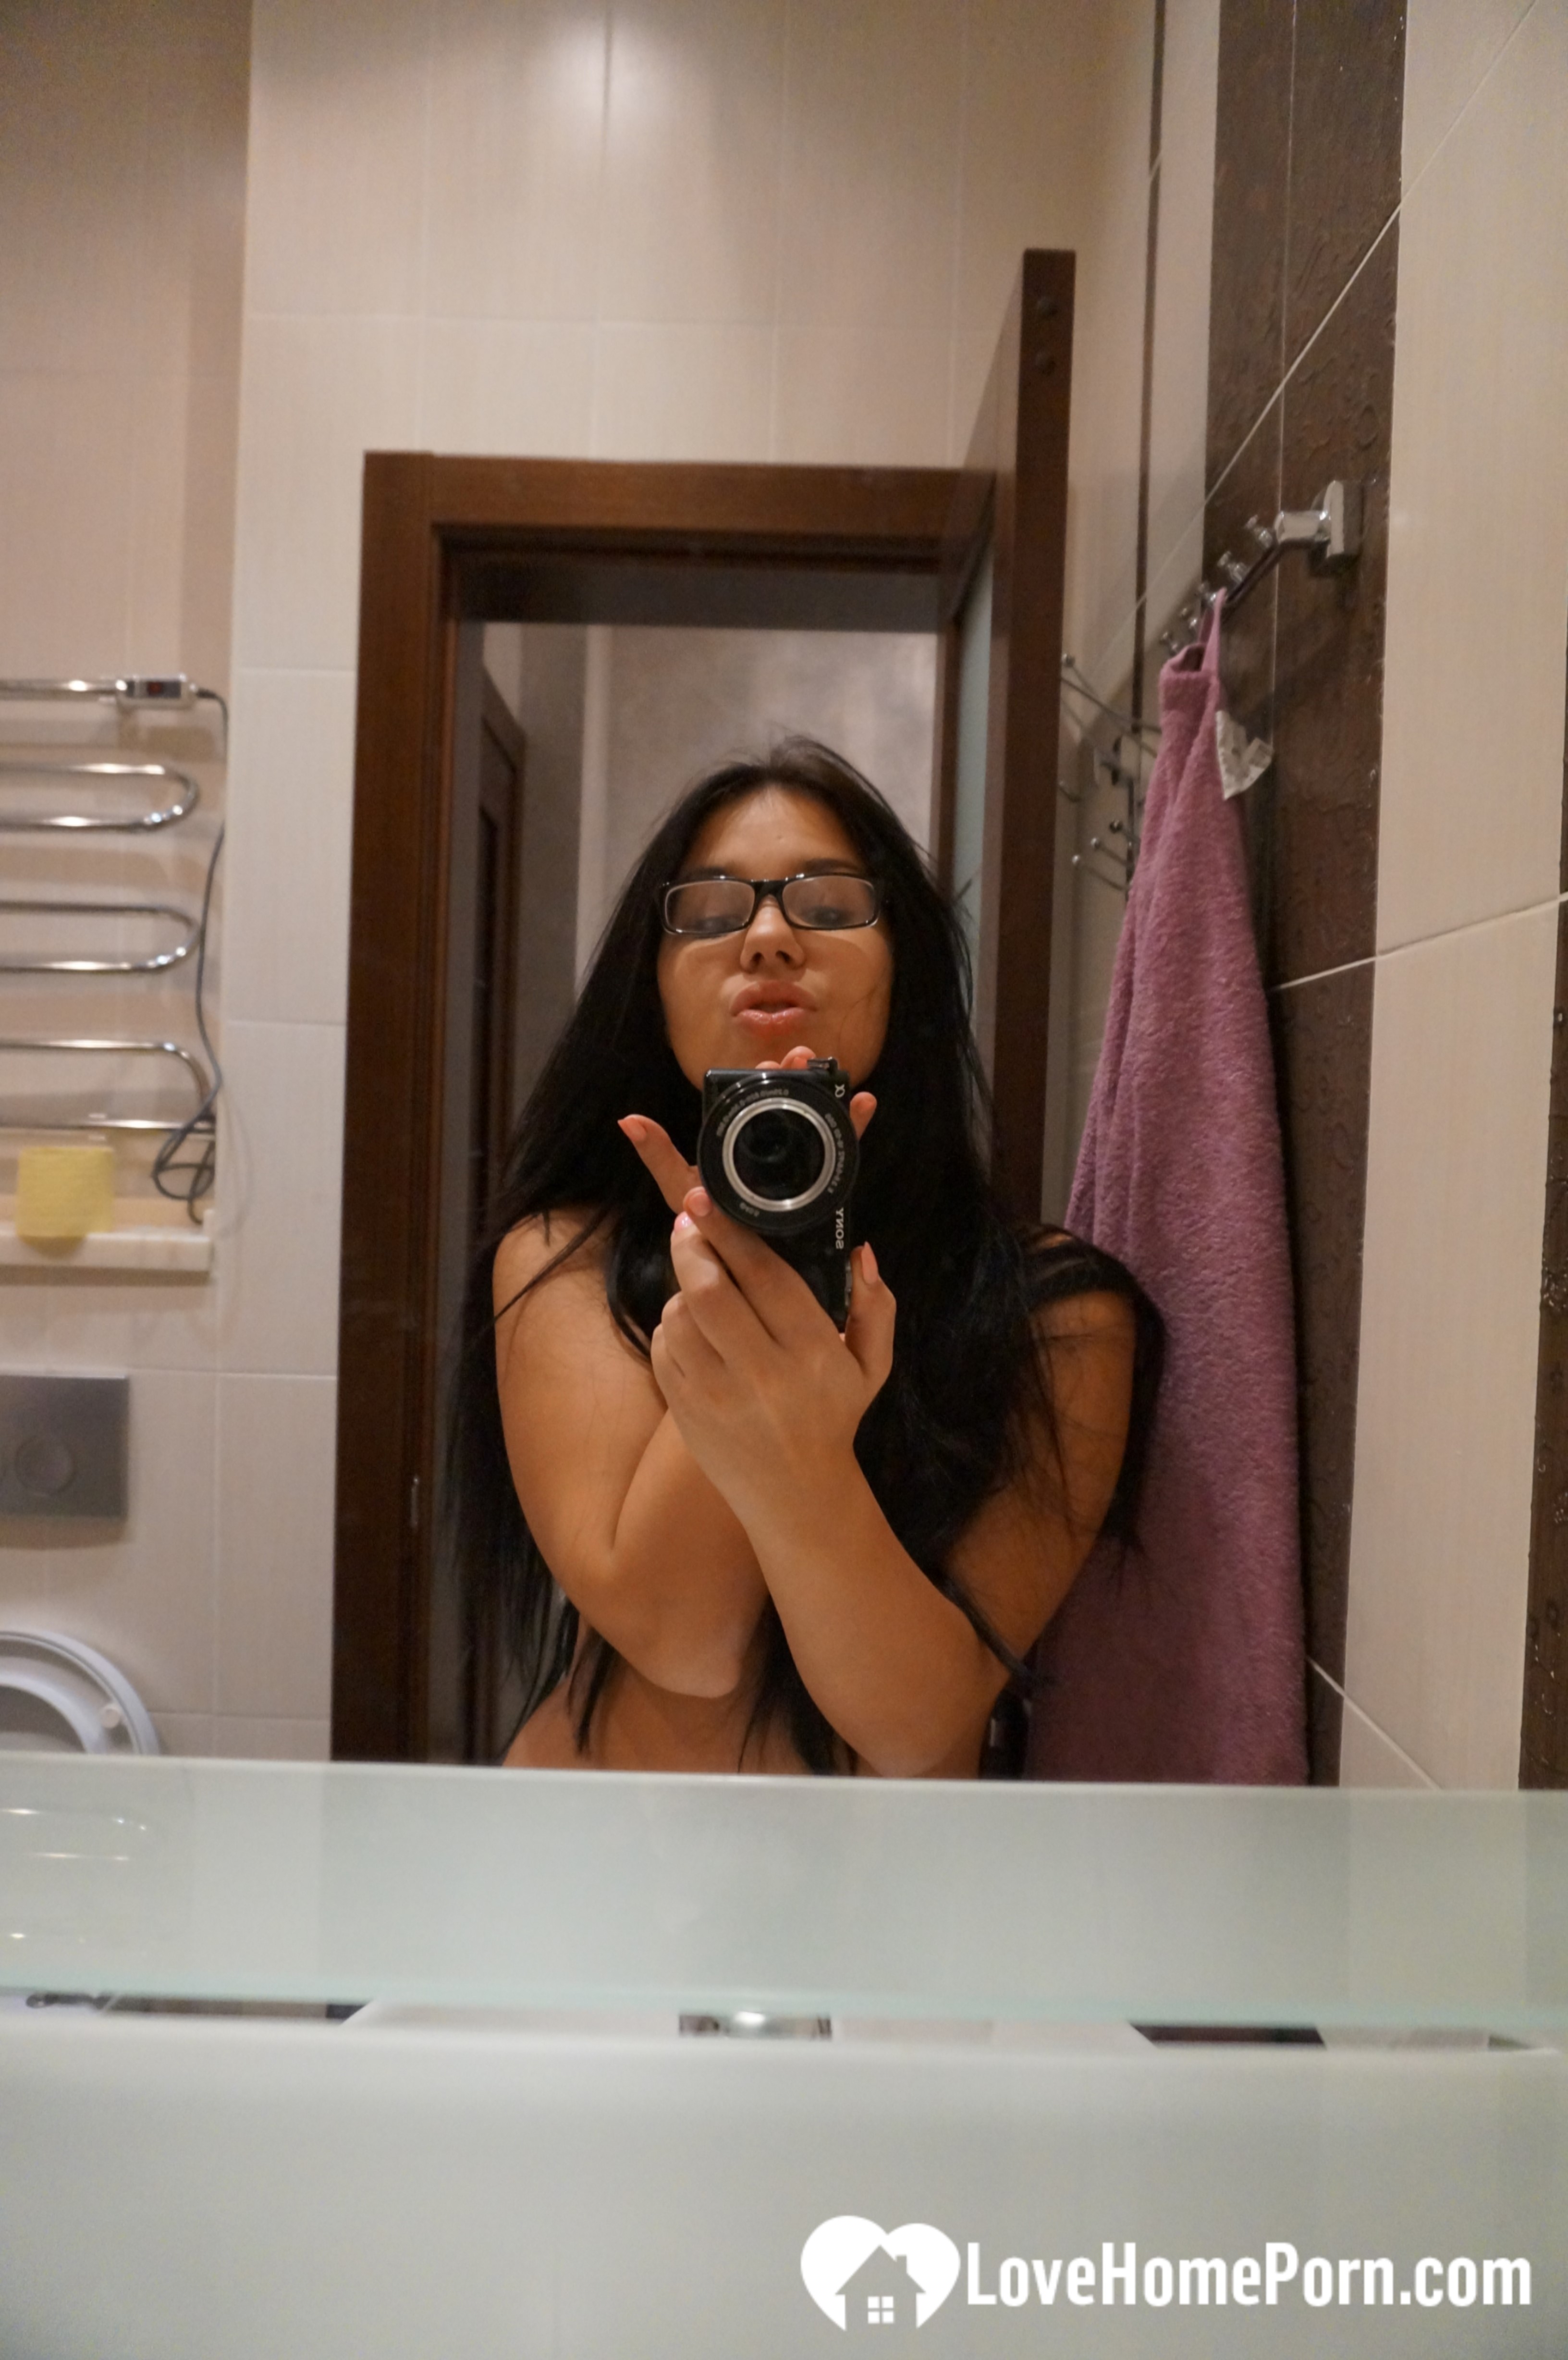 Cute nerdy babe taking some hot selfies